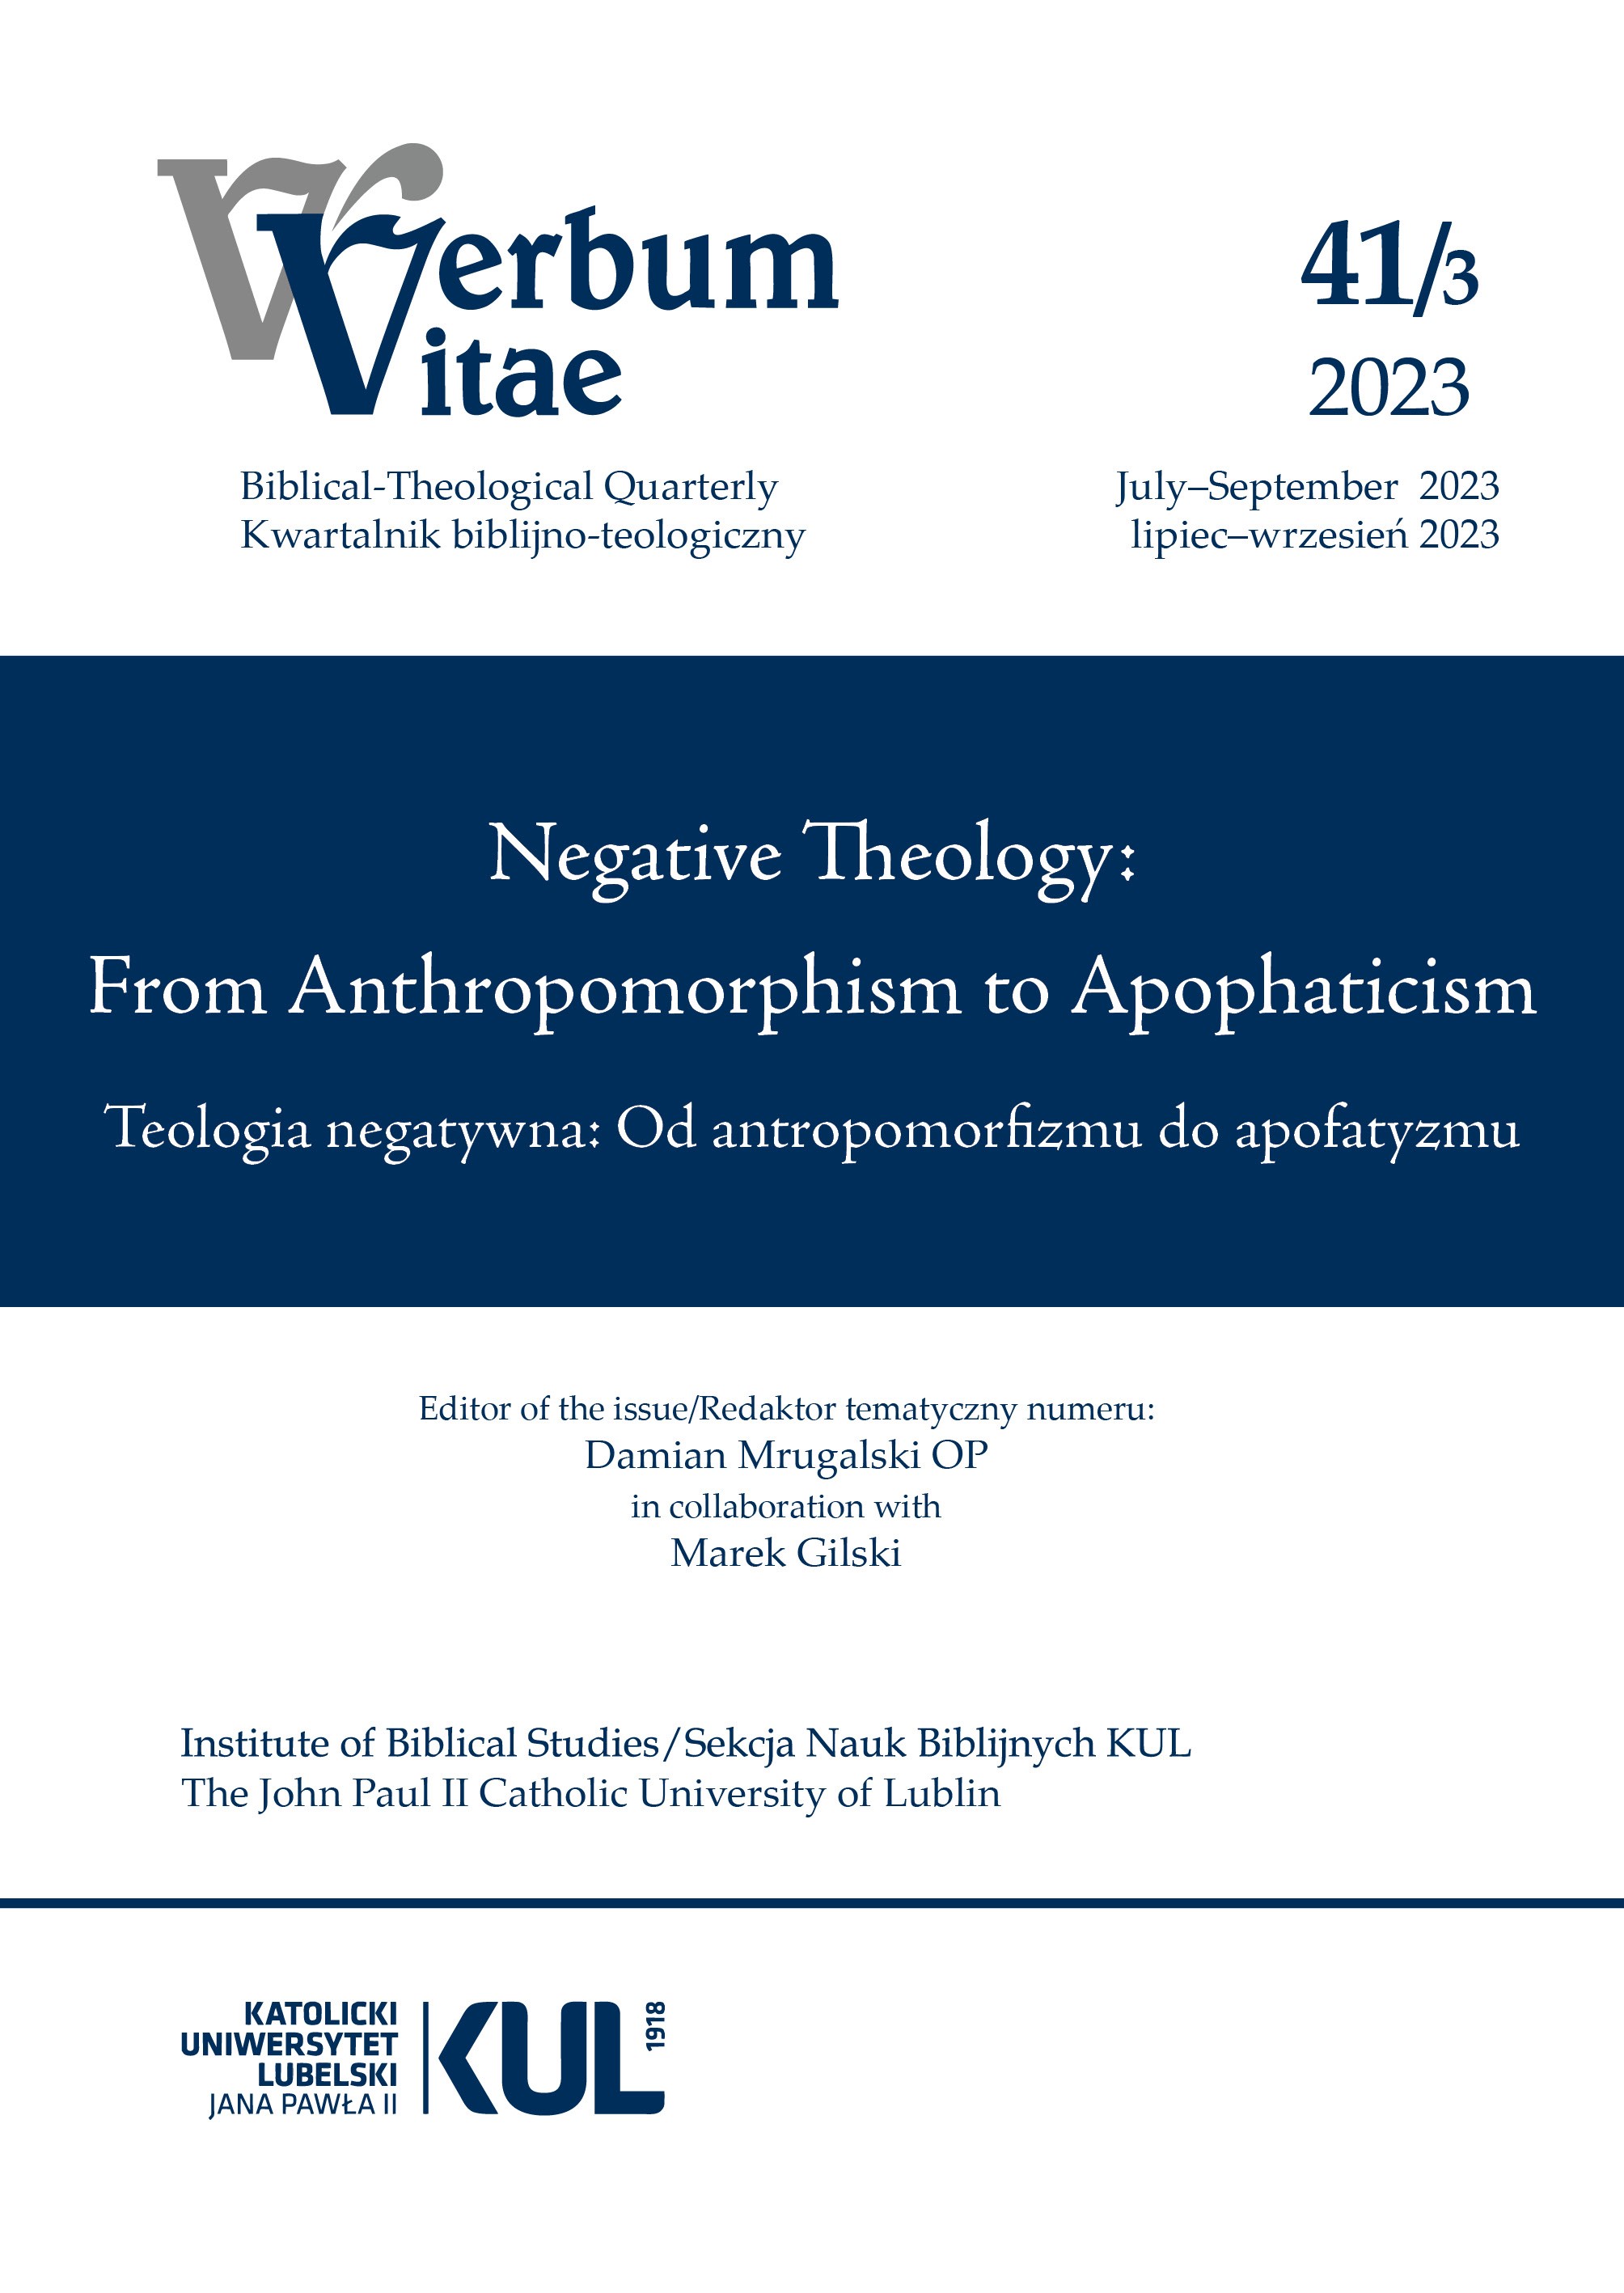 The Source Antinomy of the Mystery of the Trinity as the Foundation and Hermeneutical Key of Christian Apophaticism in the View of Vladimir N. Lossky